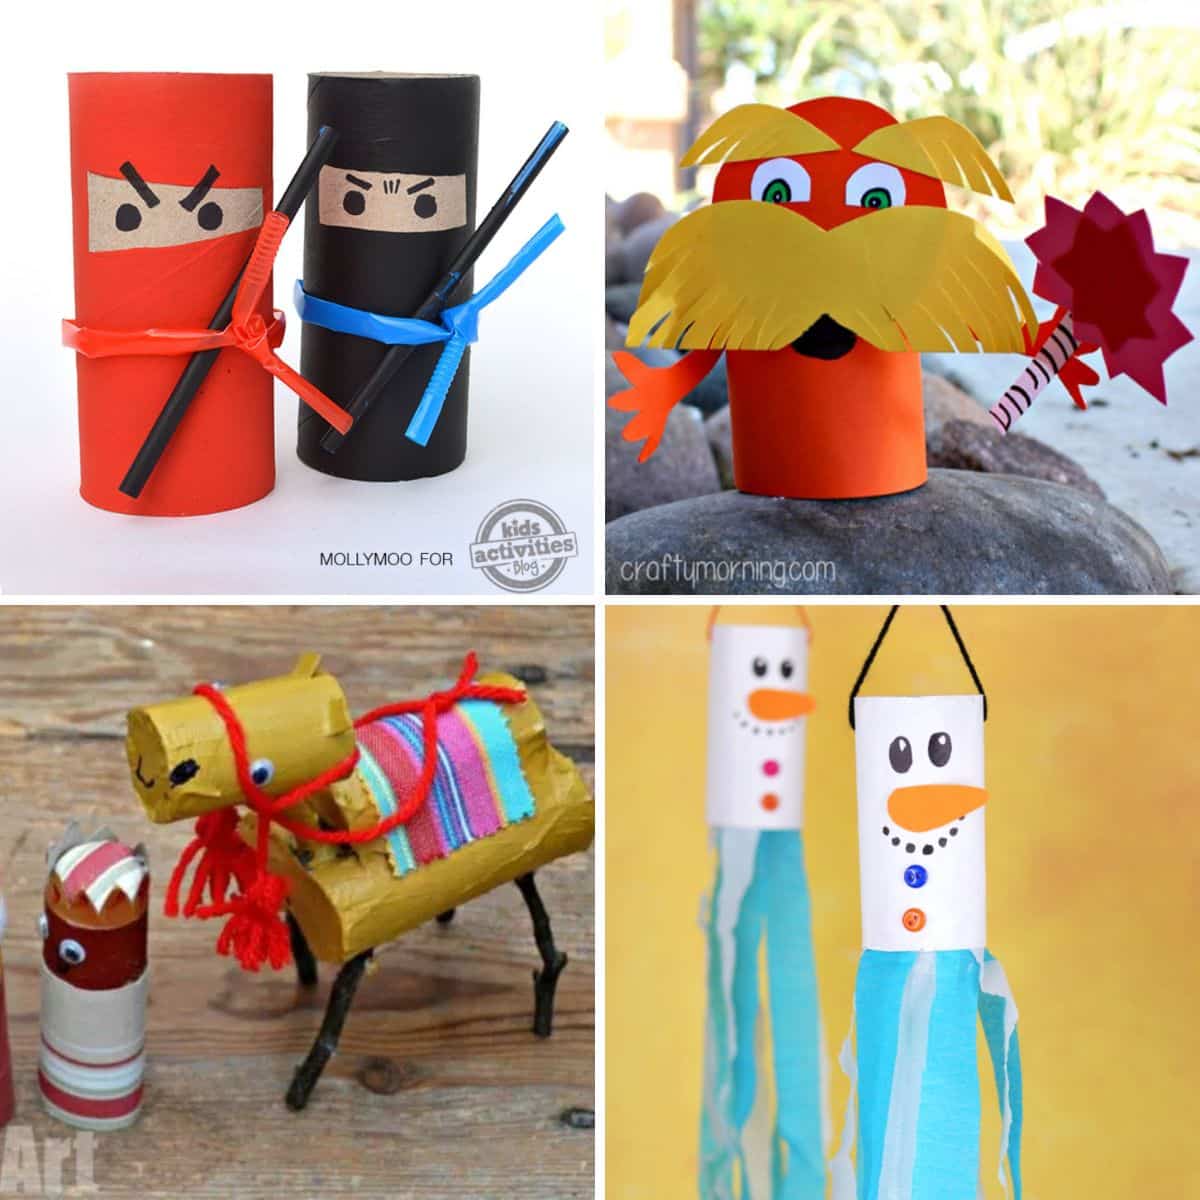 4 images of papaer roll crafts for kids.